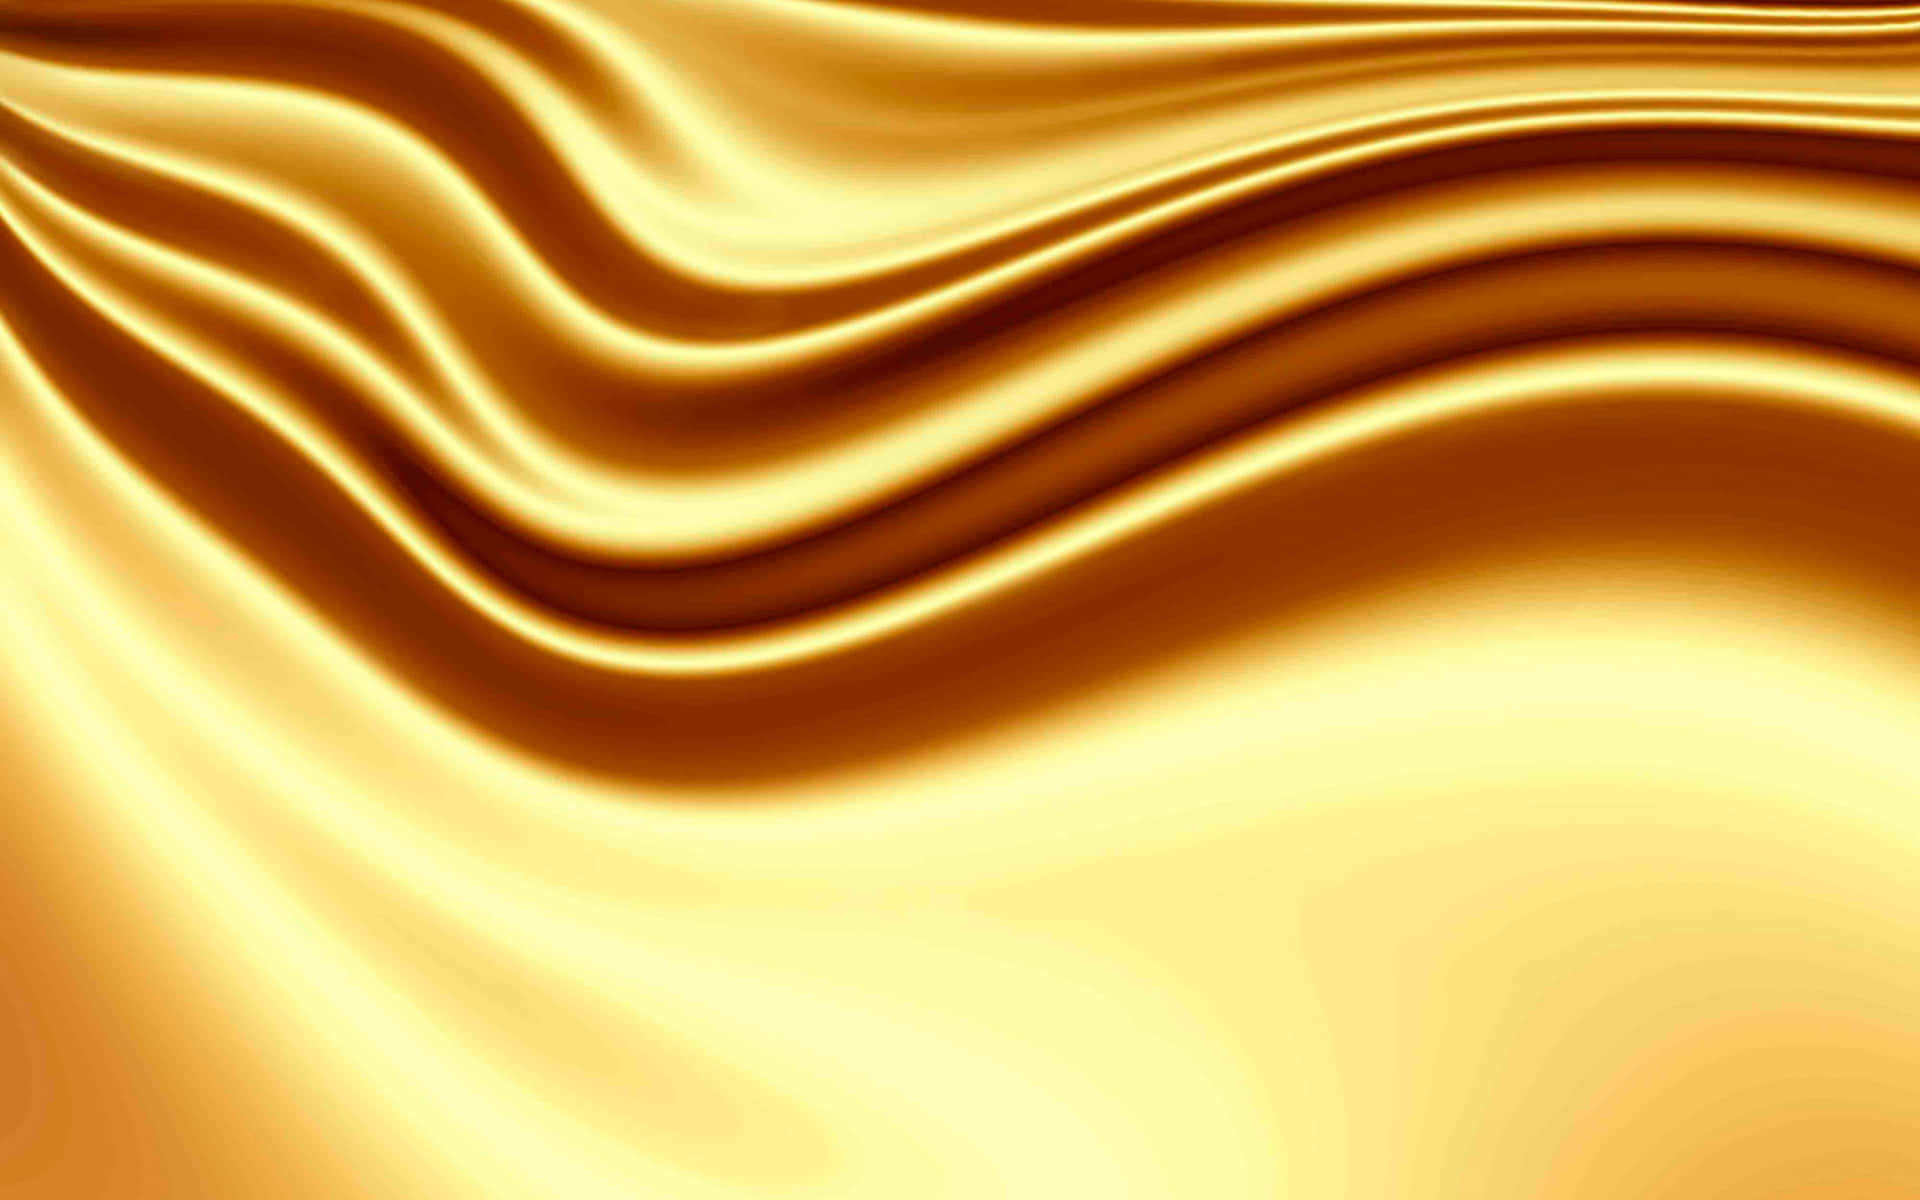 A luminous gold background radiates with a luxurious, opulent energy.